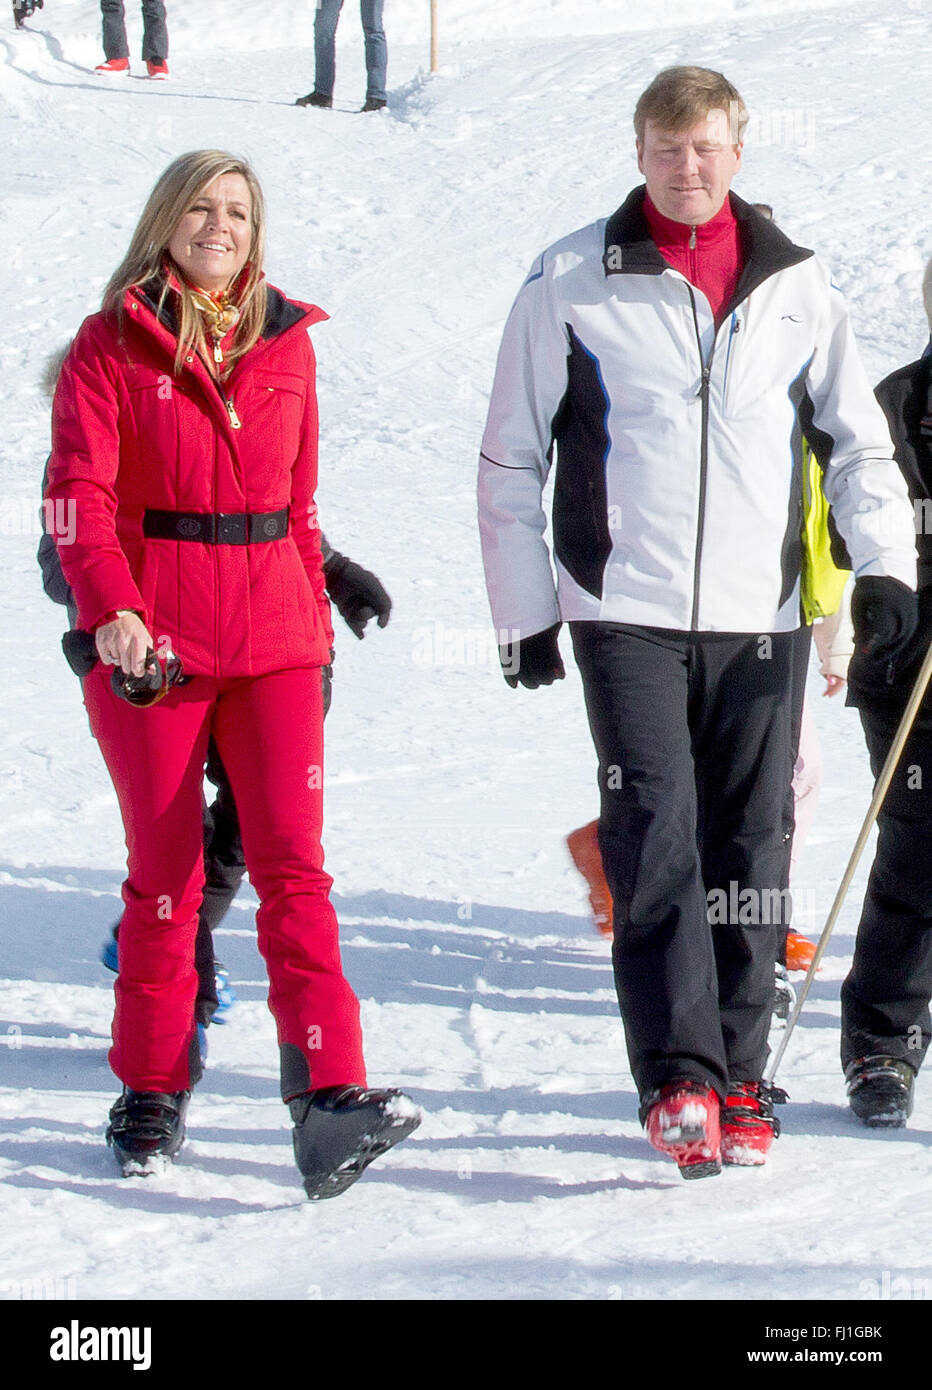 HM King Willem-Alexander and Queen Maxima of the Netherlands are pictured  in Lech, Austria, on February 22, 2016. Her daugther Princess Alexia broke  her leg while skiing on Saturday. She was immediately